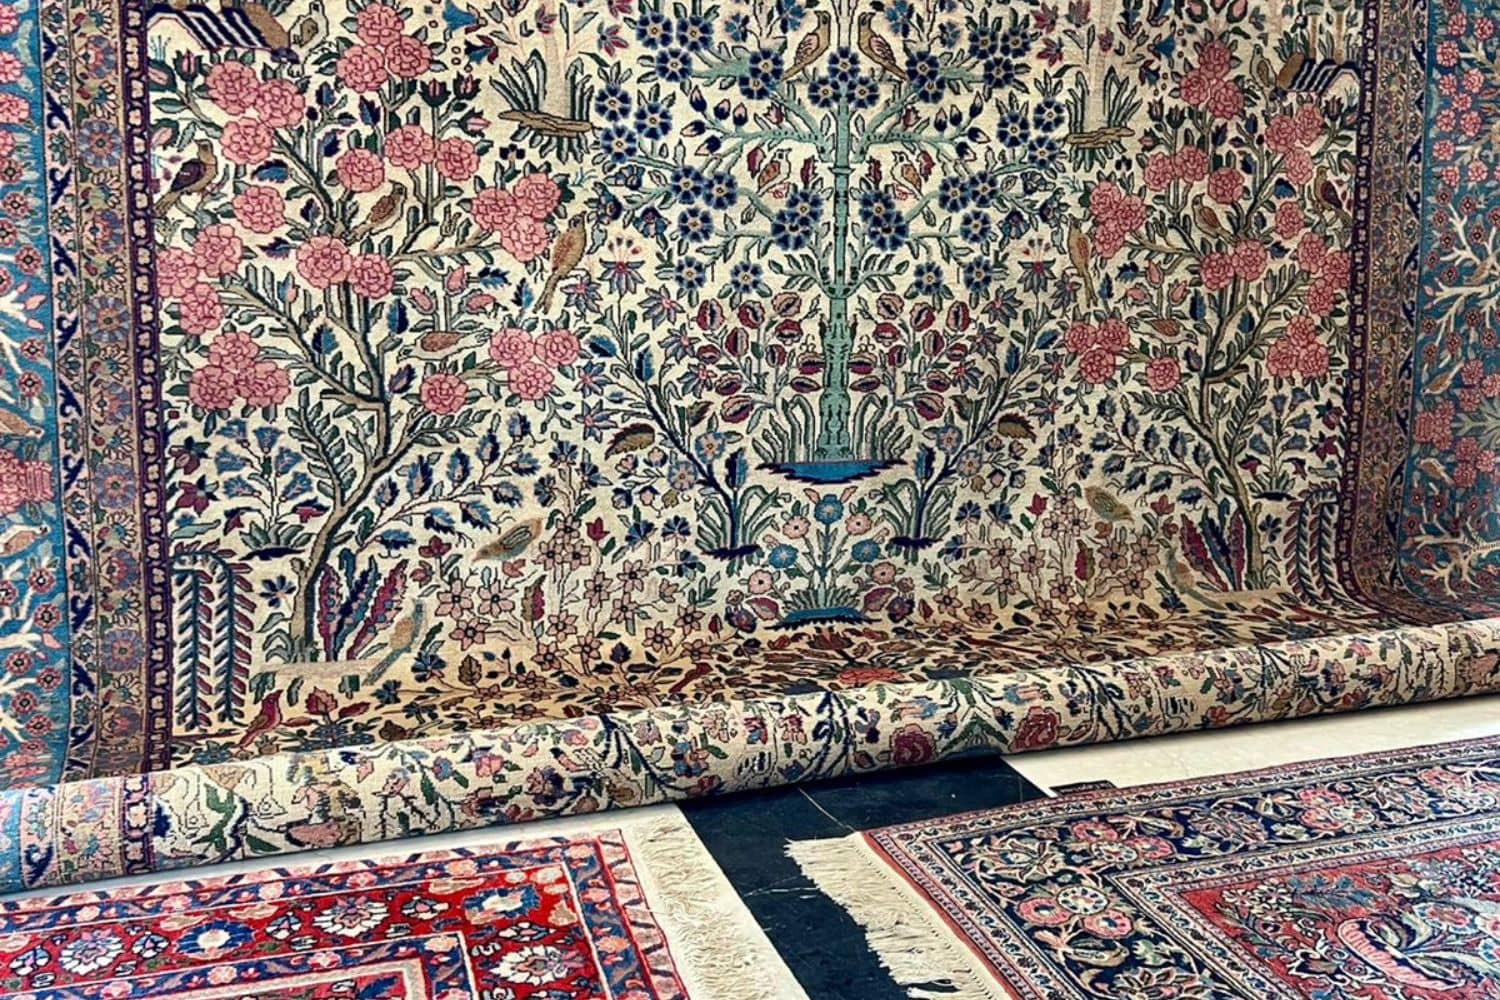 Beige Persian carpet with intricate floral designs by Carpet Cellar